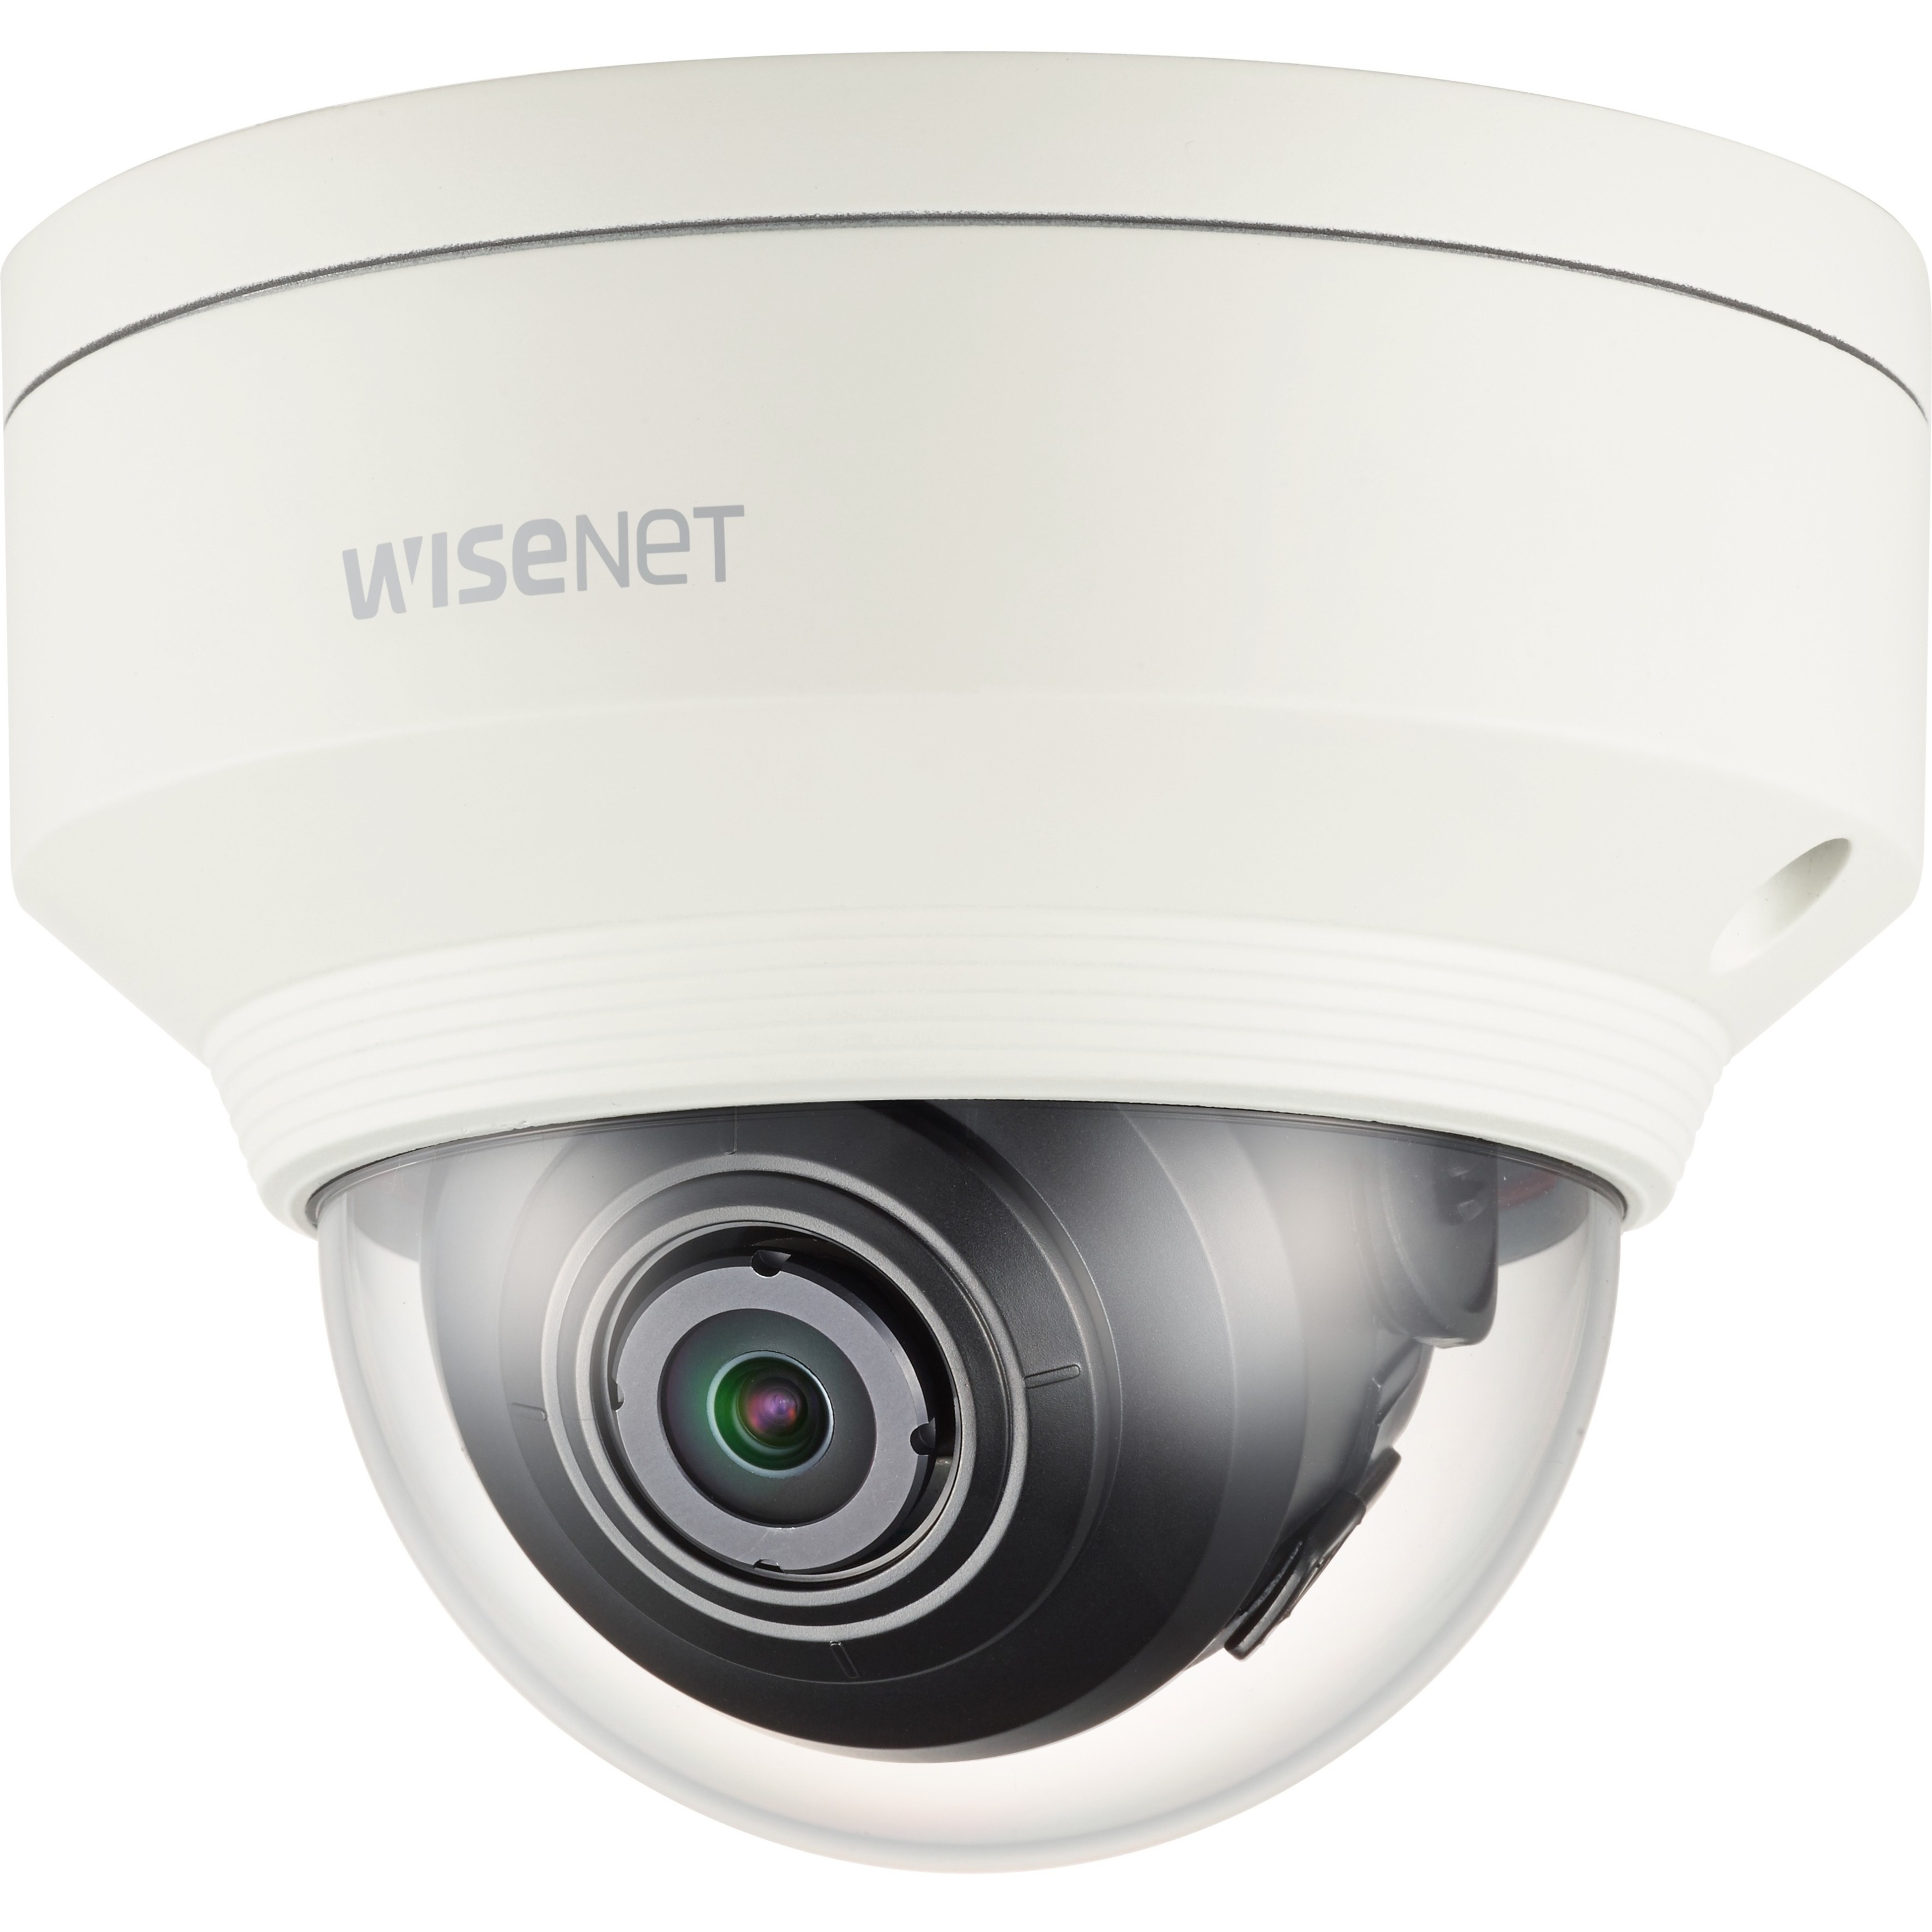 Wisenet XNV-6010 2 Megapixel Outdoor Full HD Network Camera, Monochrome, Color, Dome, Ivory - image 1 of 3